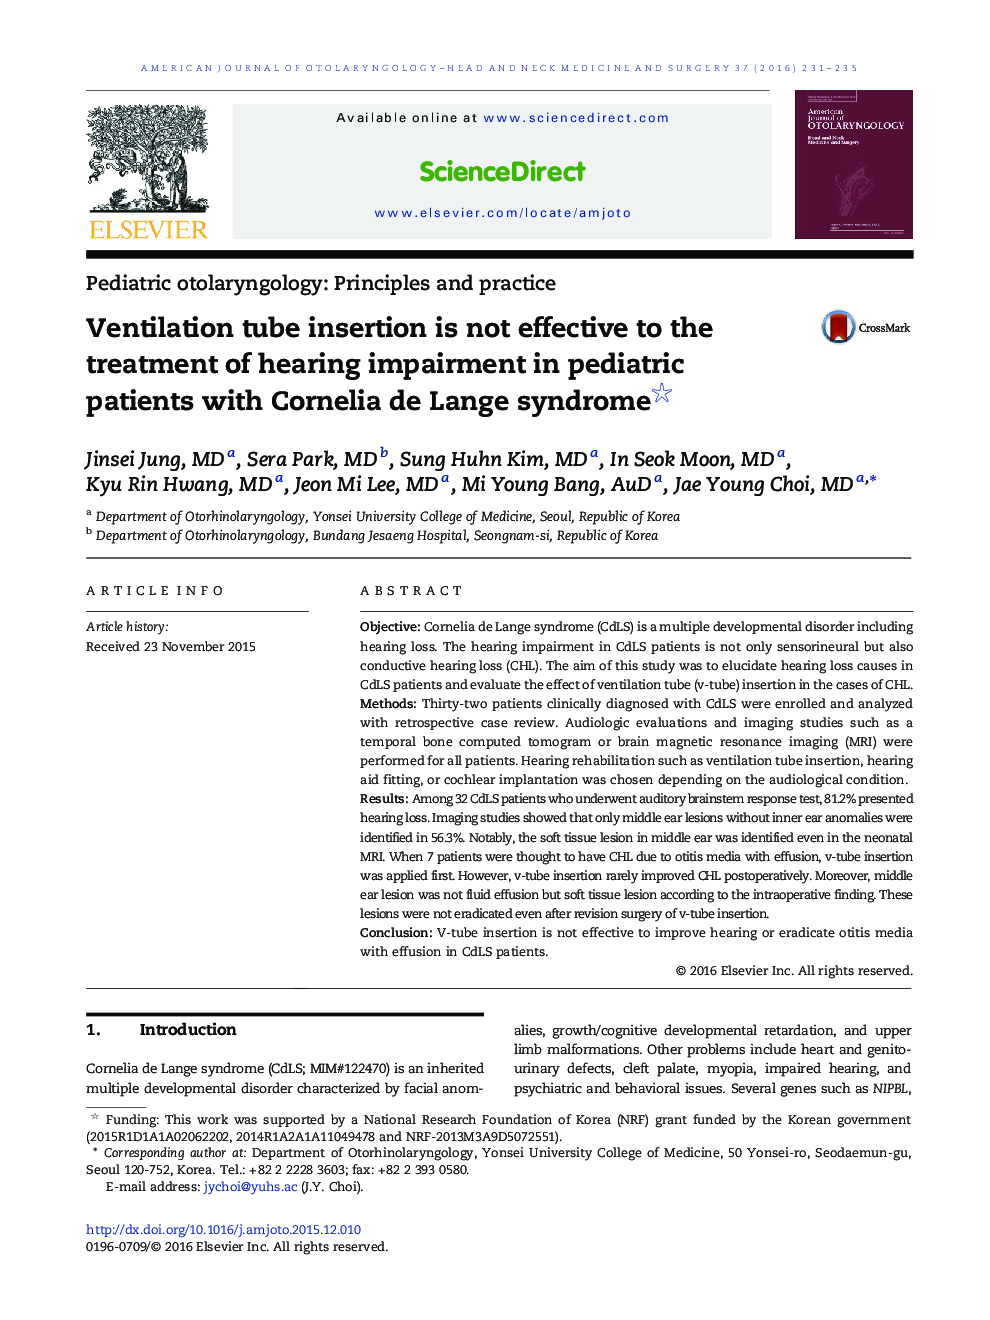 Ventilation tube insertion is not effective to the treatment of hearing impairment in pediatric patients with Cornelia de Lange syndrome 